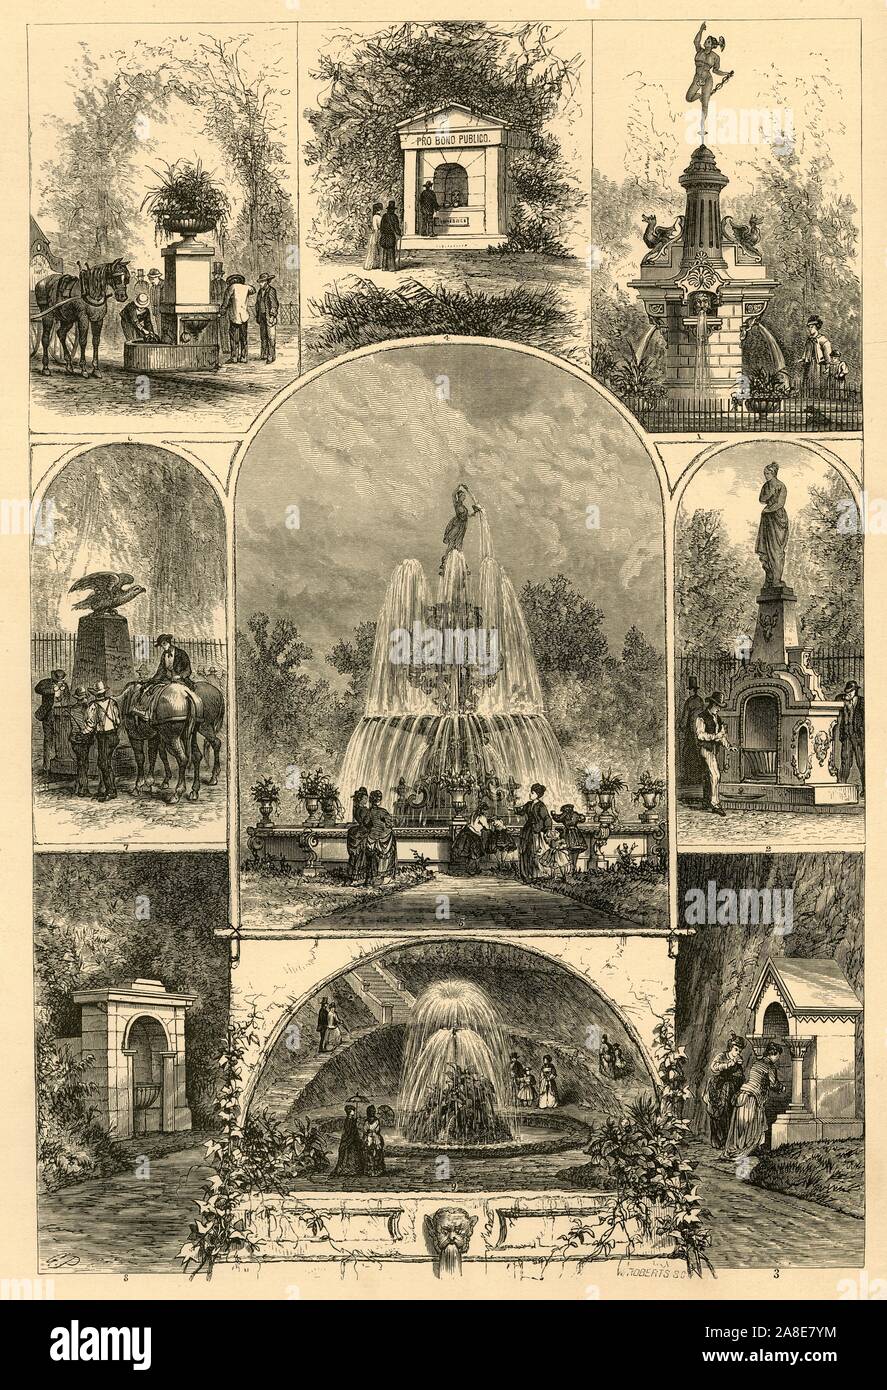 'Fountains in Philadelphia', 1874. Horse troughts and fountains in public parks and gardens in Philadelphia, Pennsylvania, USA. 'The thirsty wayfarer, whether man or beast, will find no lack of fountains whereat to quench his thirst in Philadelphia. There are scores of these grateful drinking-places on the high- and by-ways of the city and suburbs, some of them, as may be seen by the accompanying illustration, not without a picturesque or artistic beauty and fitness in their design, which does not render the water less refreshing or the pilgrim less appreciative. These street fountains are due Stock Photo